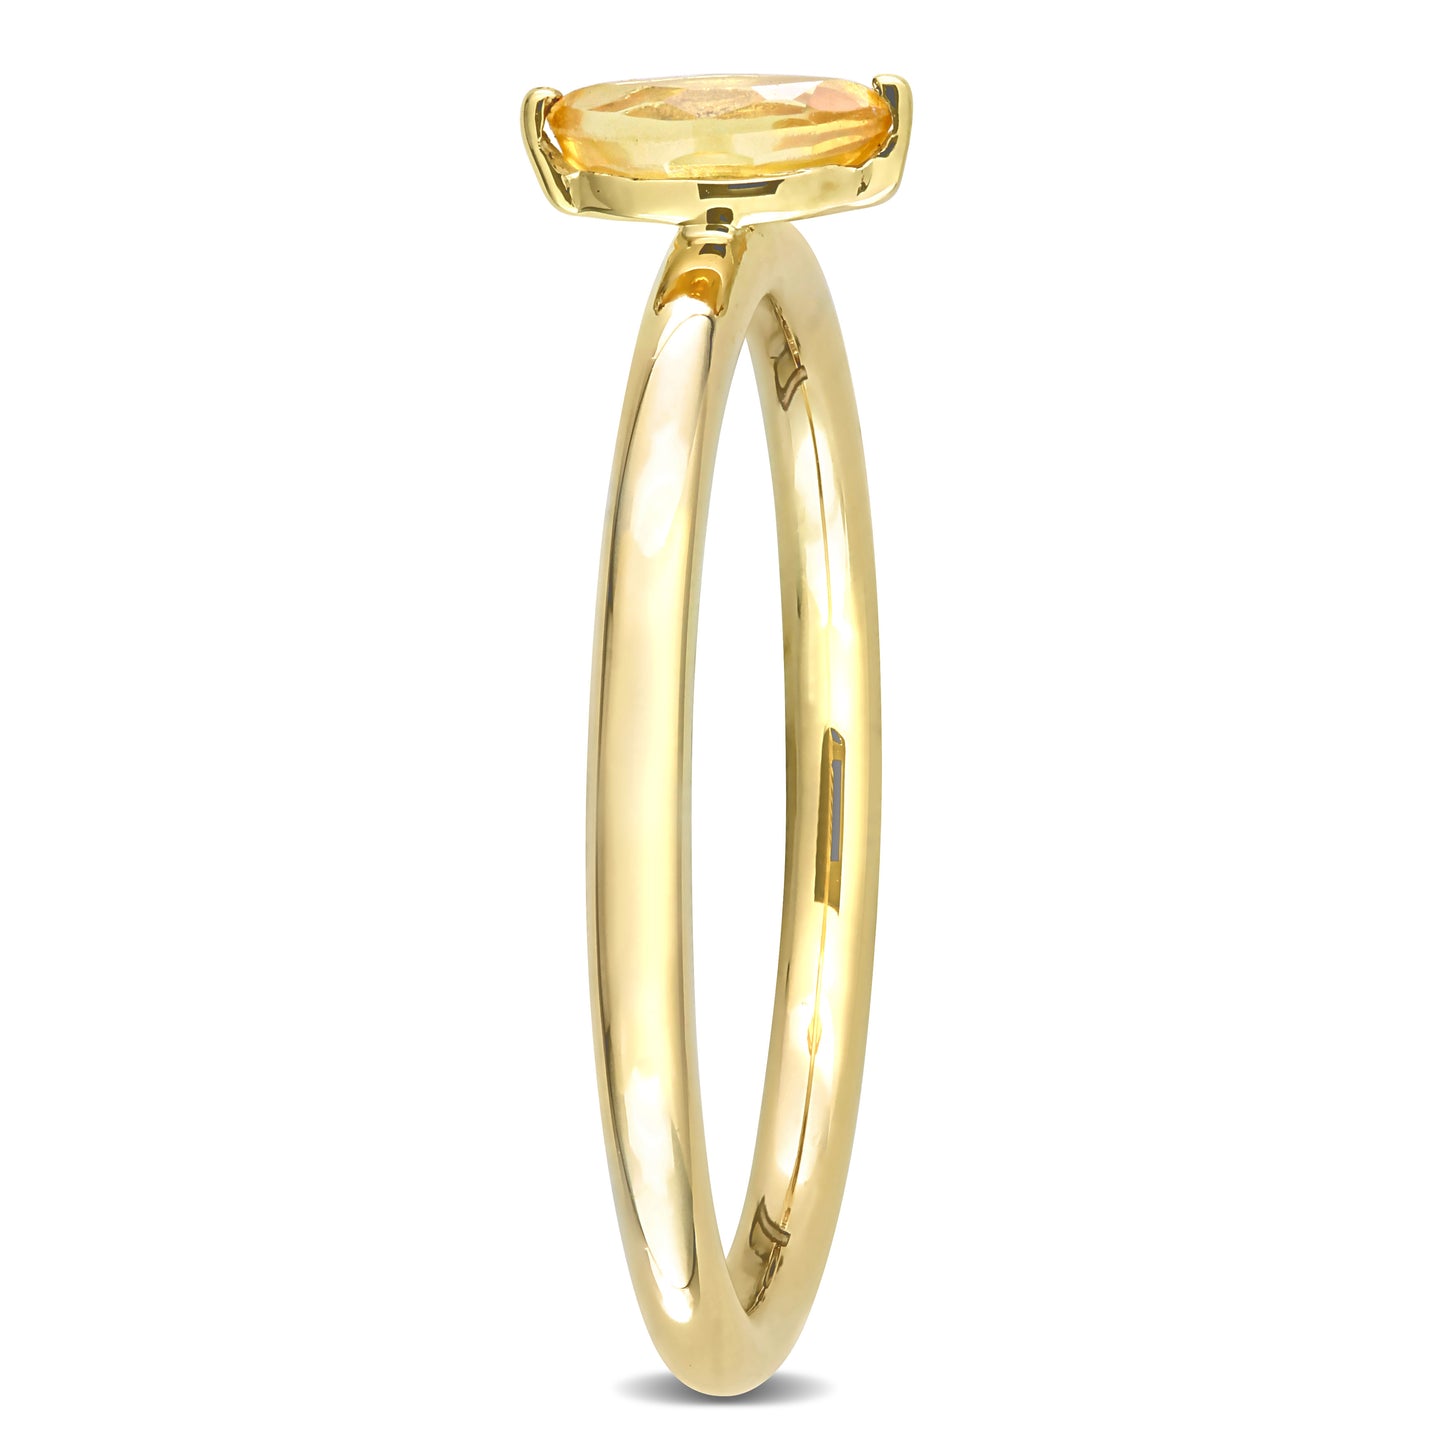 Marquise Cut Yellow Sapphire Ring in 10k Yellow Gold